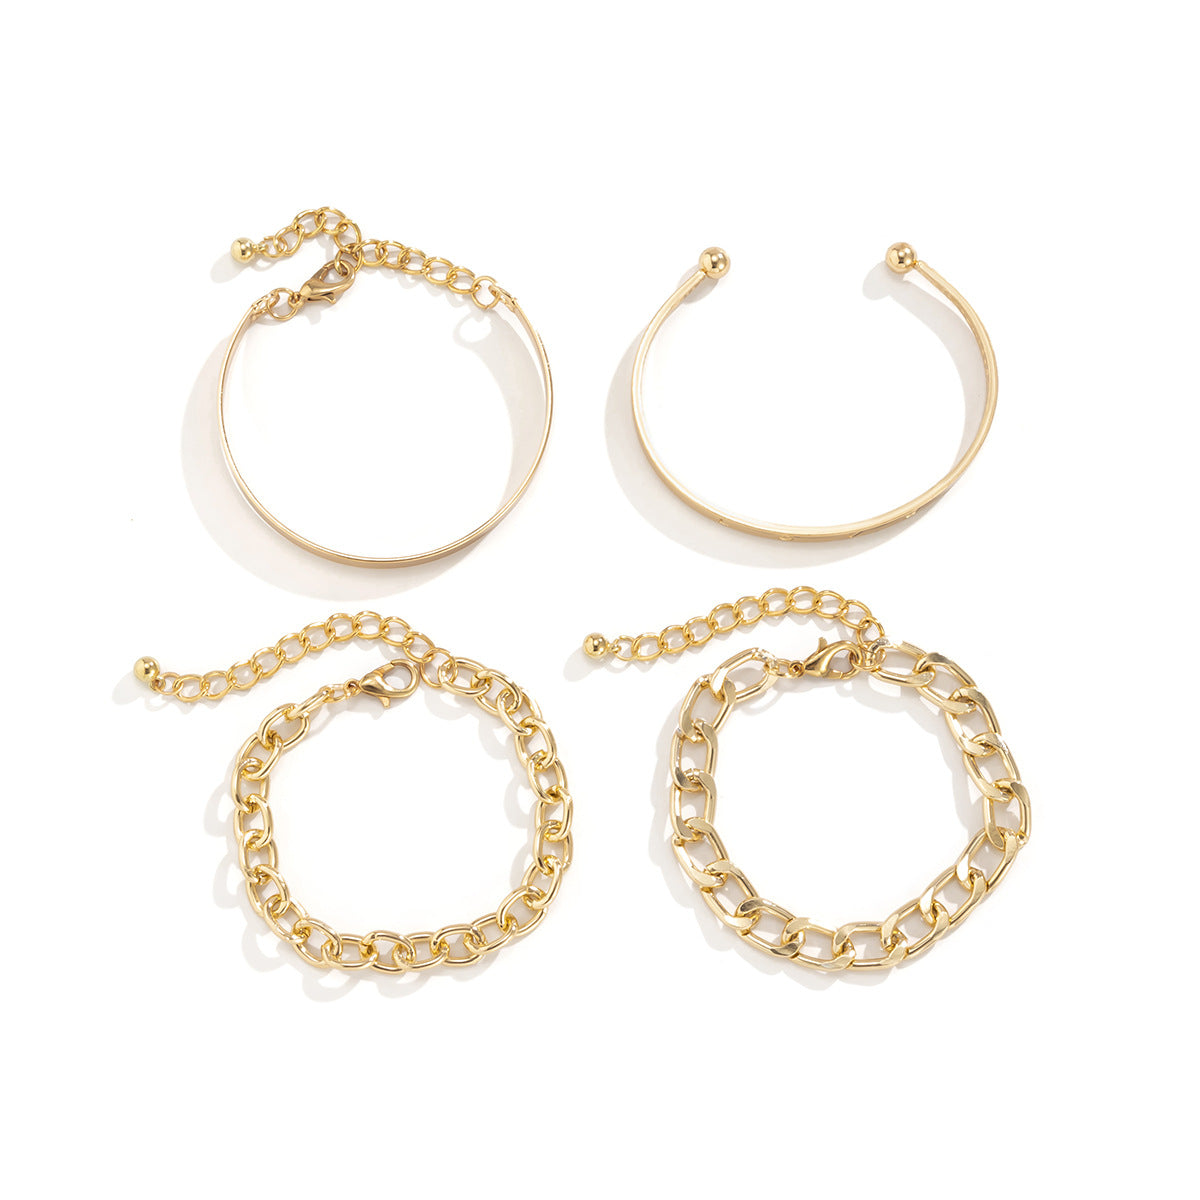 Simple And Smooth C-shaped Hollow Chain Bracelet Set